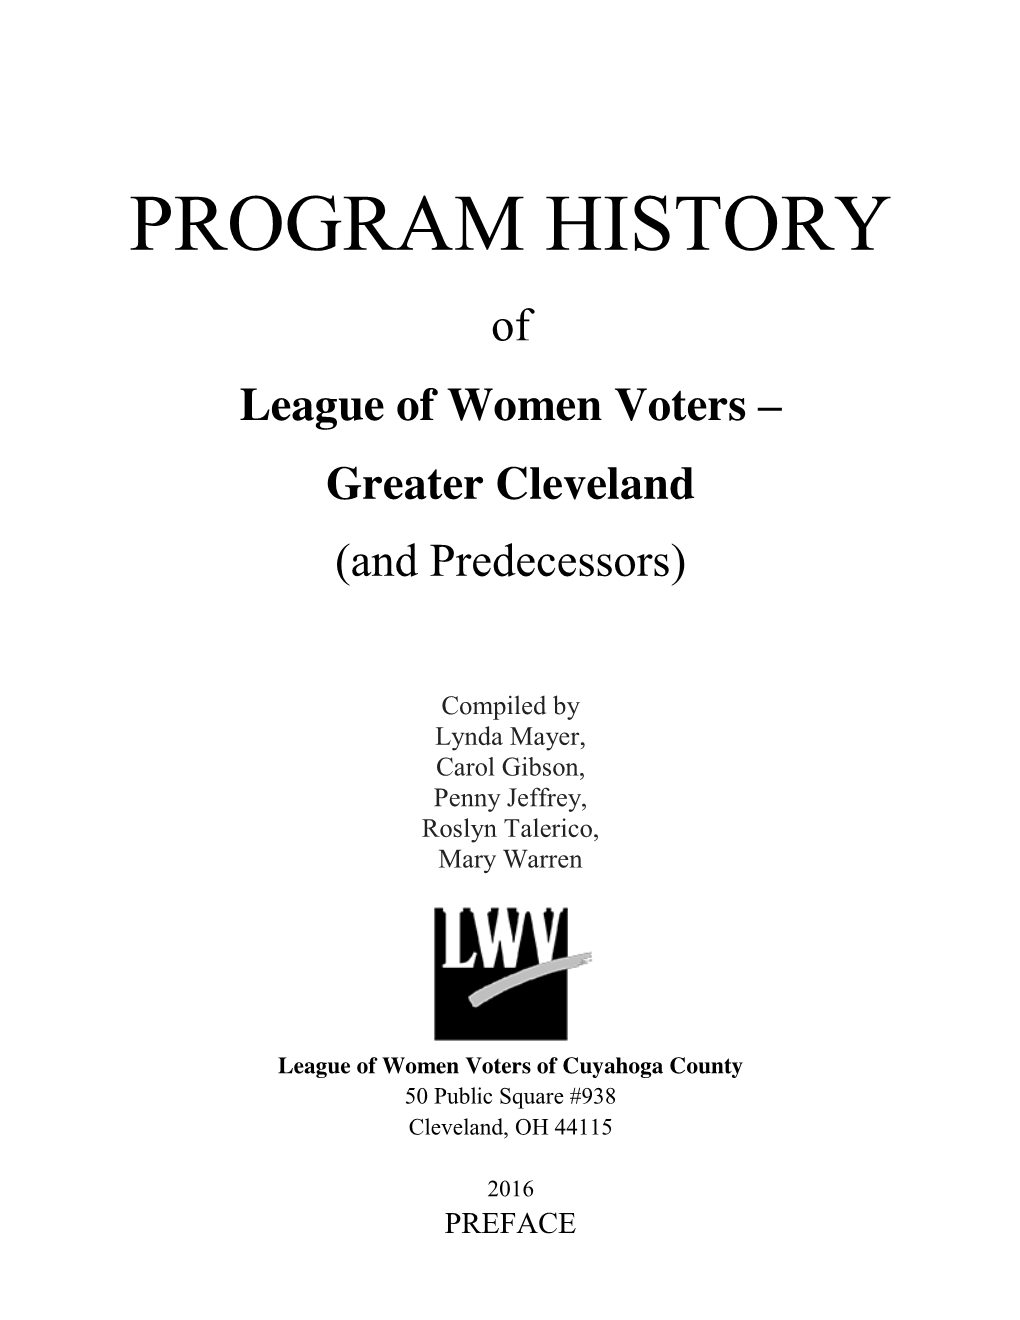 PROGRAM HISTORY of League of Women Voters – Greater Cleveland (And Predecessors)